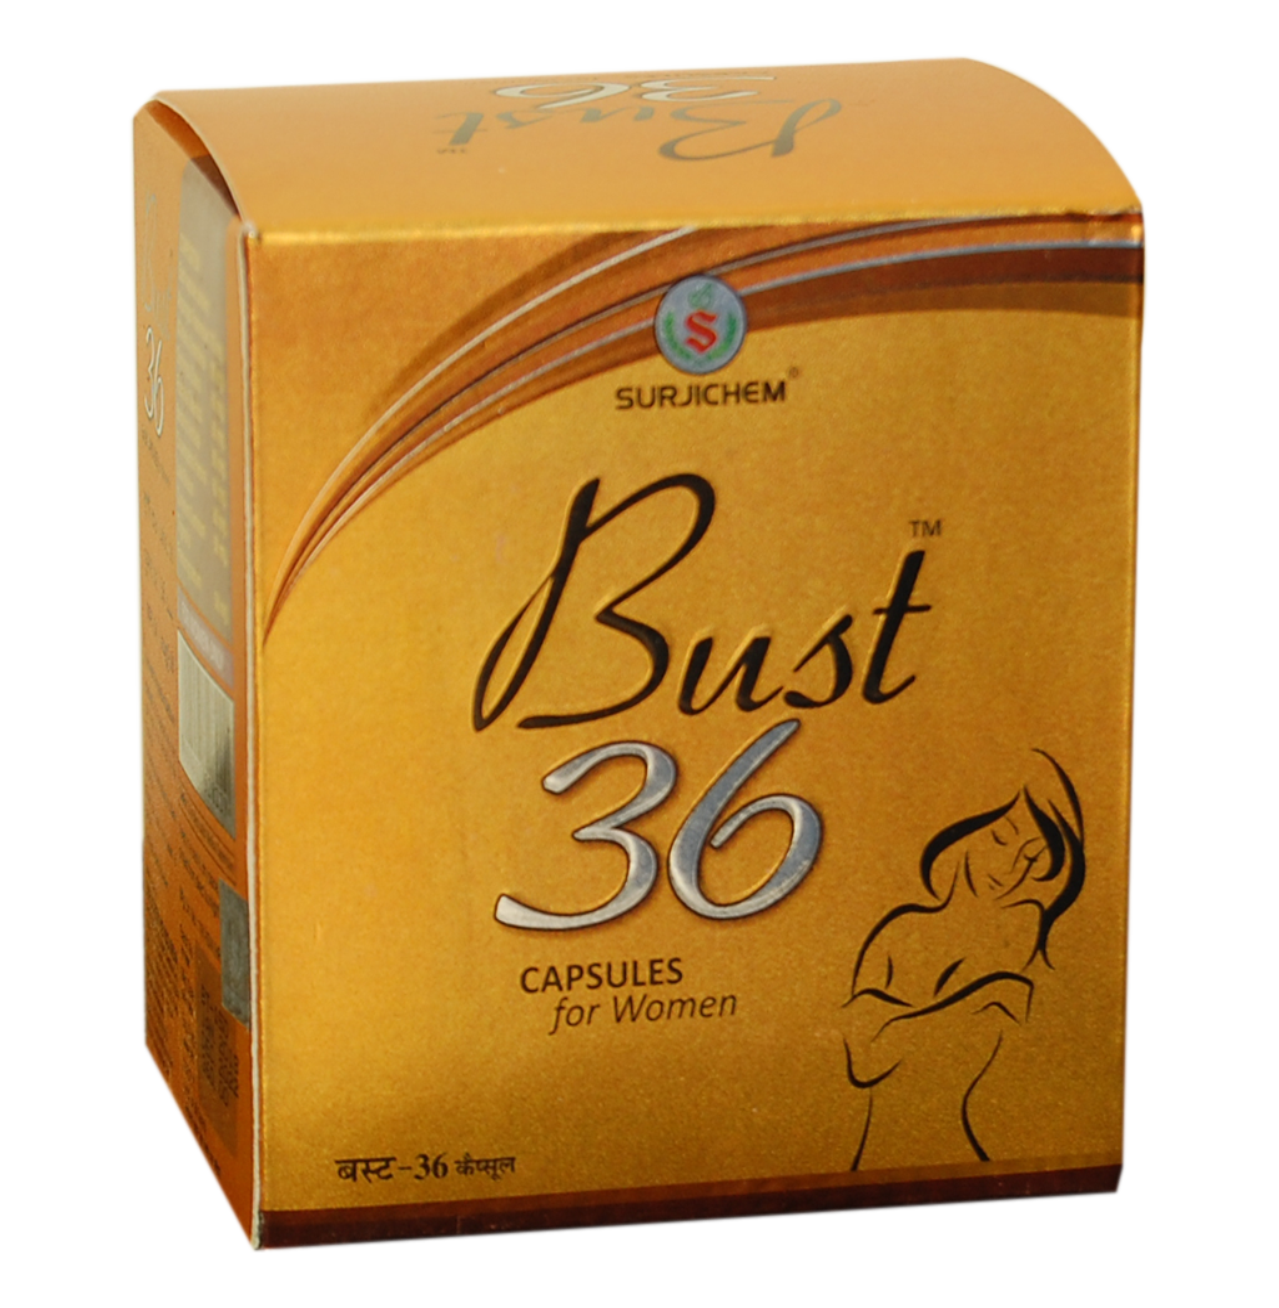 Divyaherbs Bust 36 Capsules at Rs 1399/piece, Ghaziabad